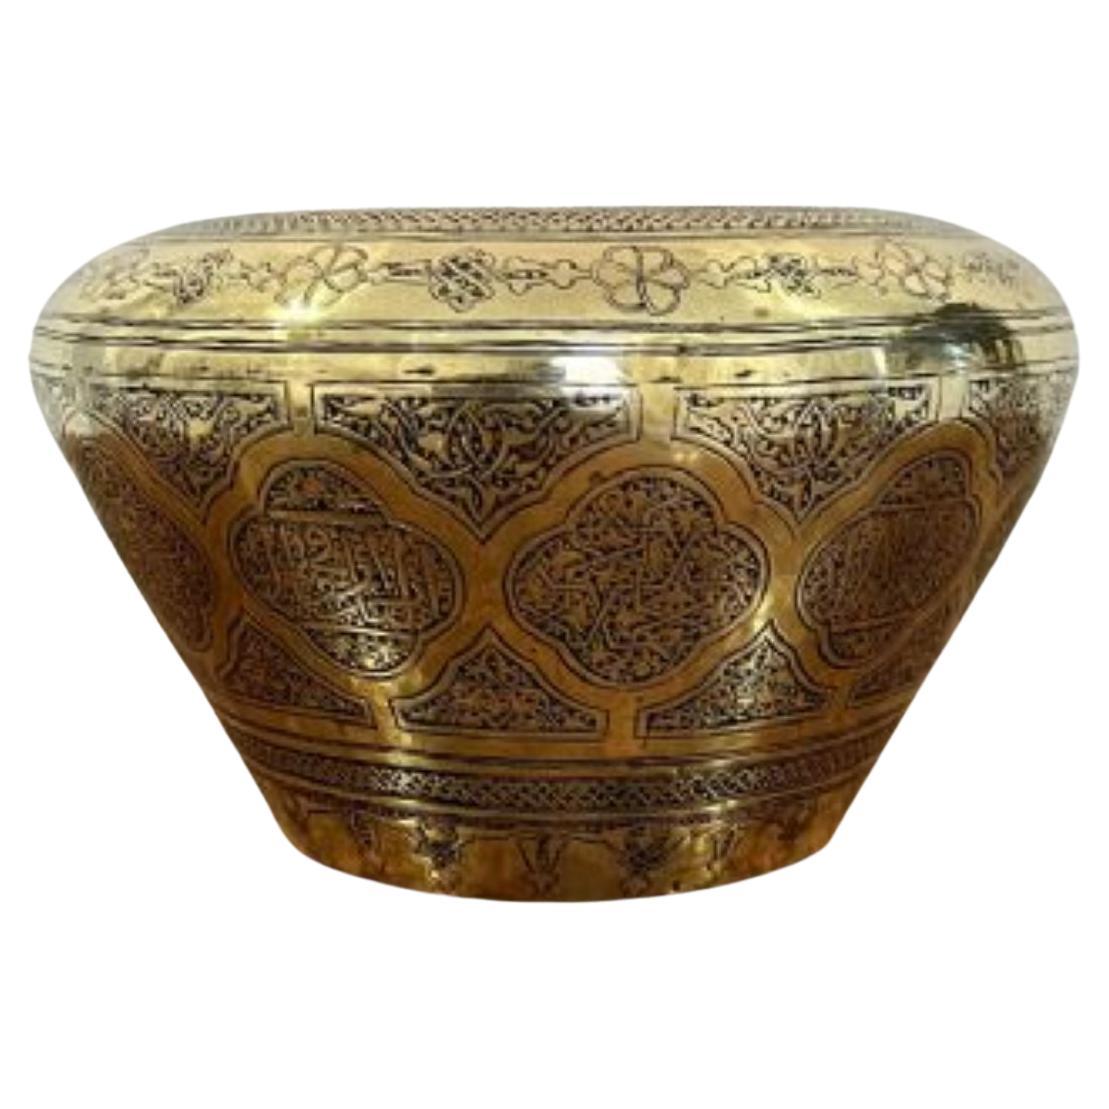 Quality antique Victorian brass jardiniere For Sale